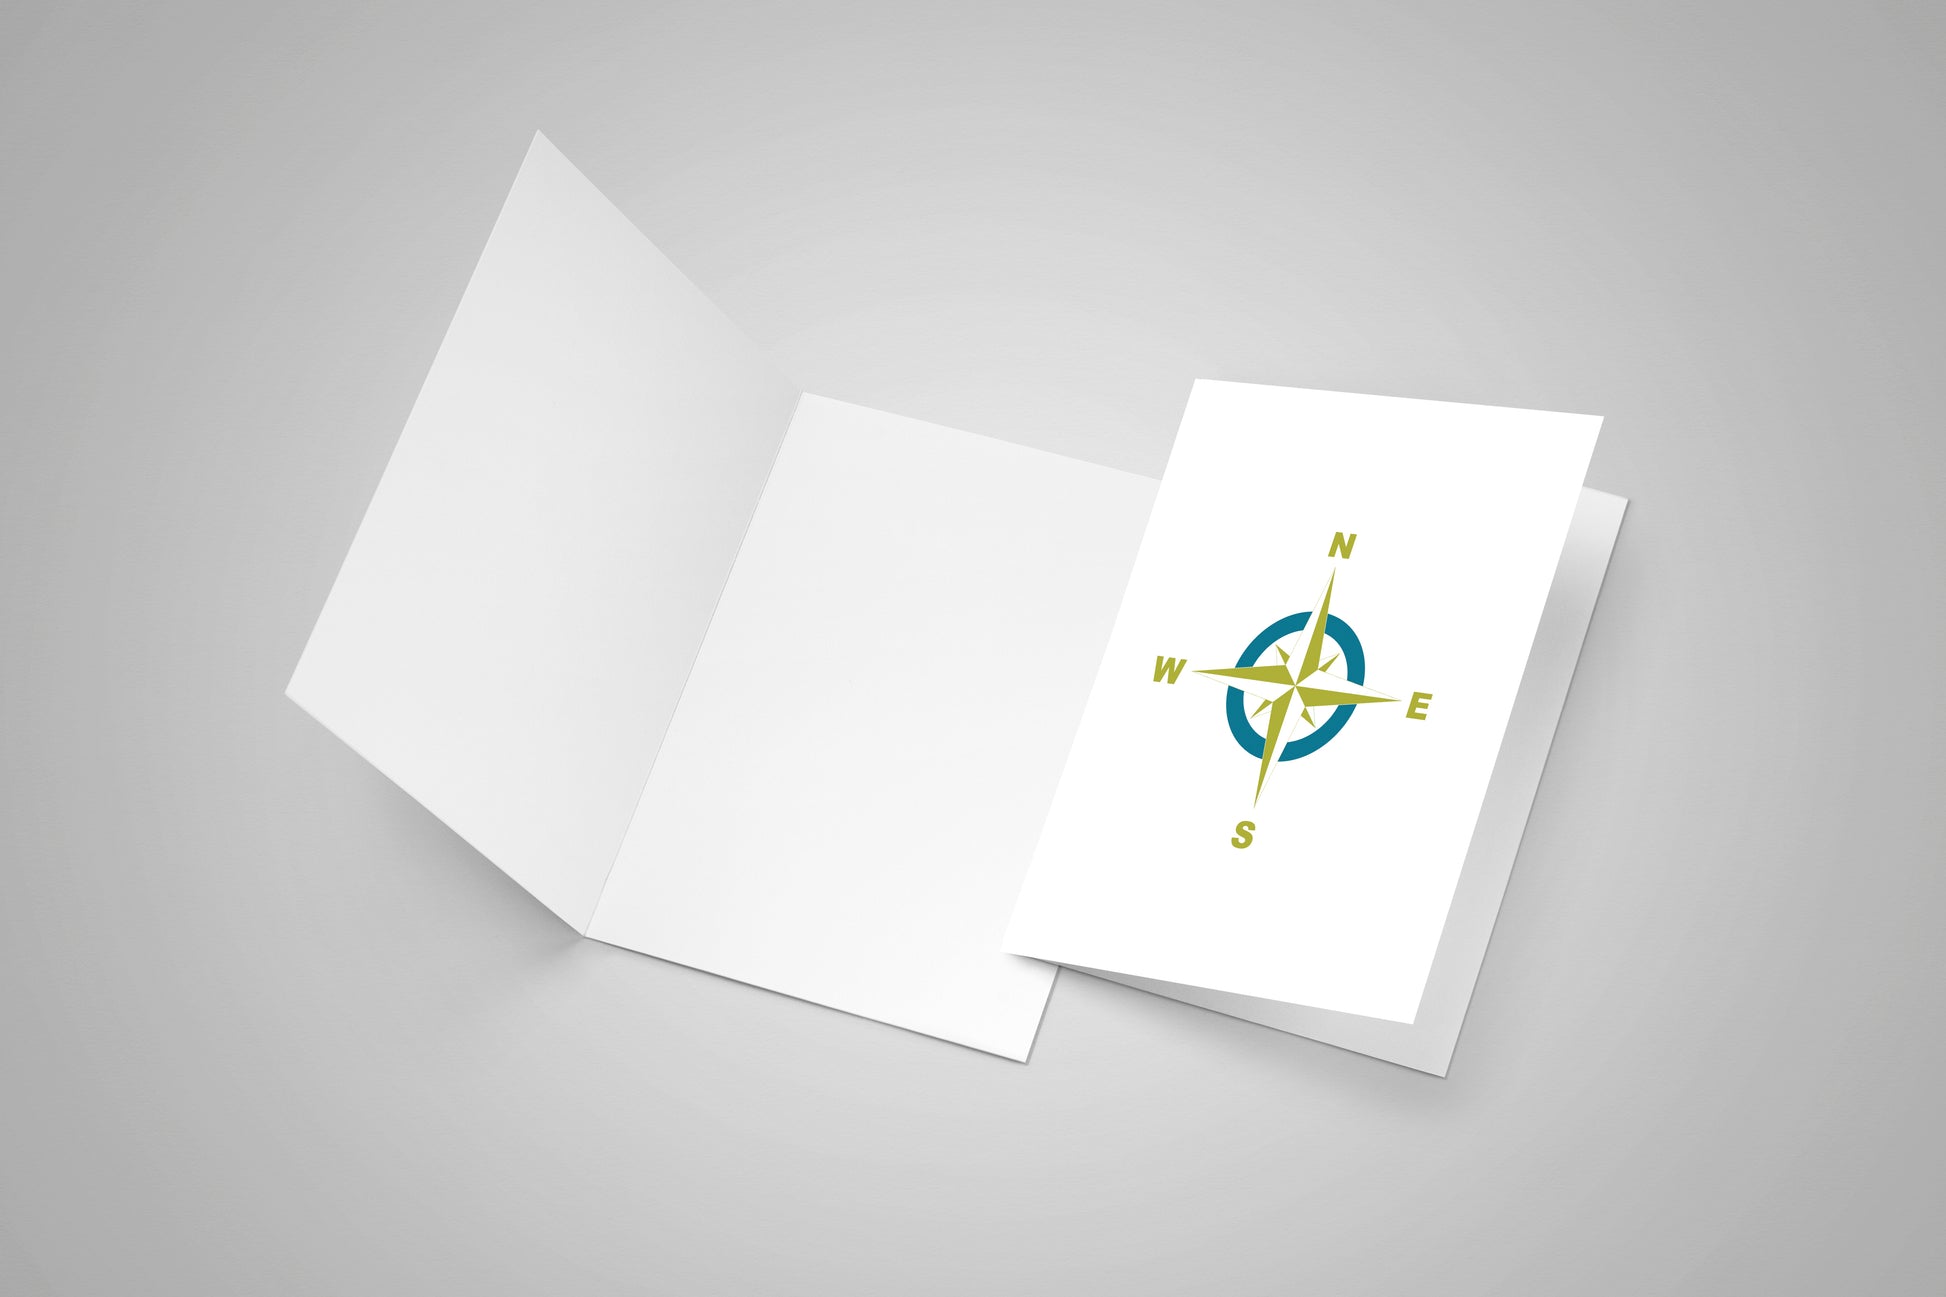 A blank card and second card with a compass rose on the front in teal and lime colours.